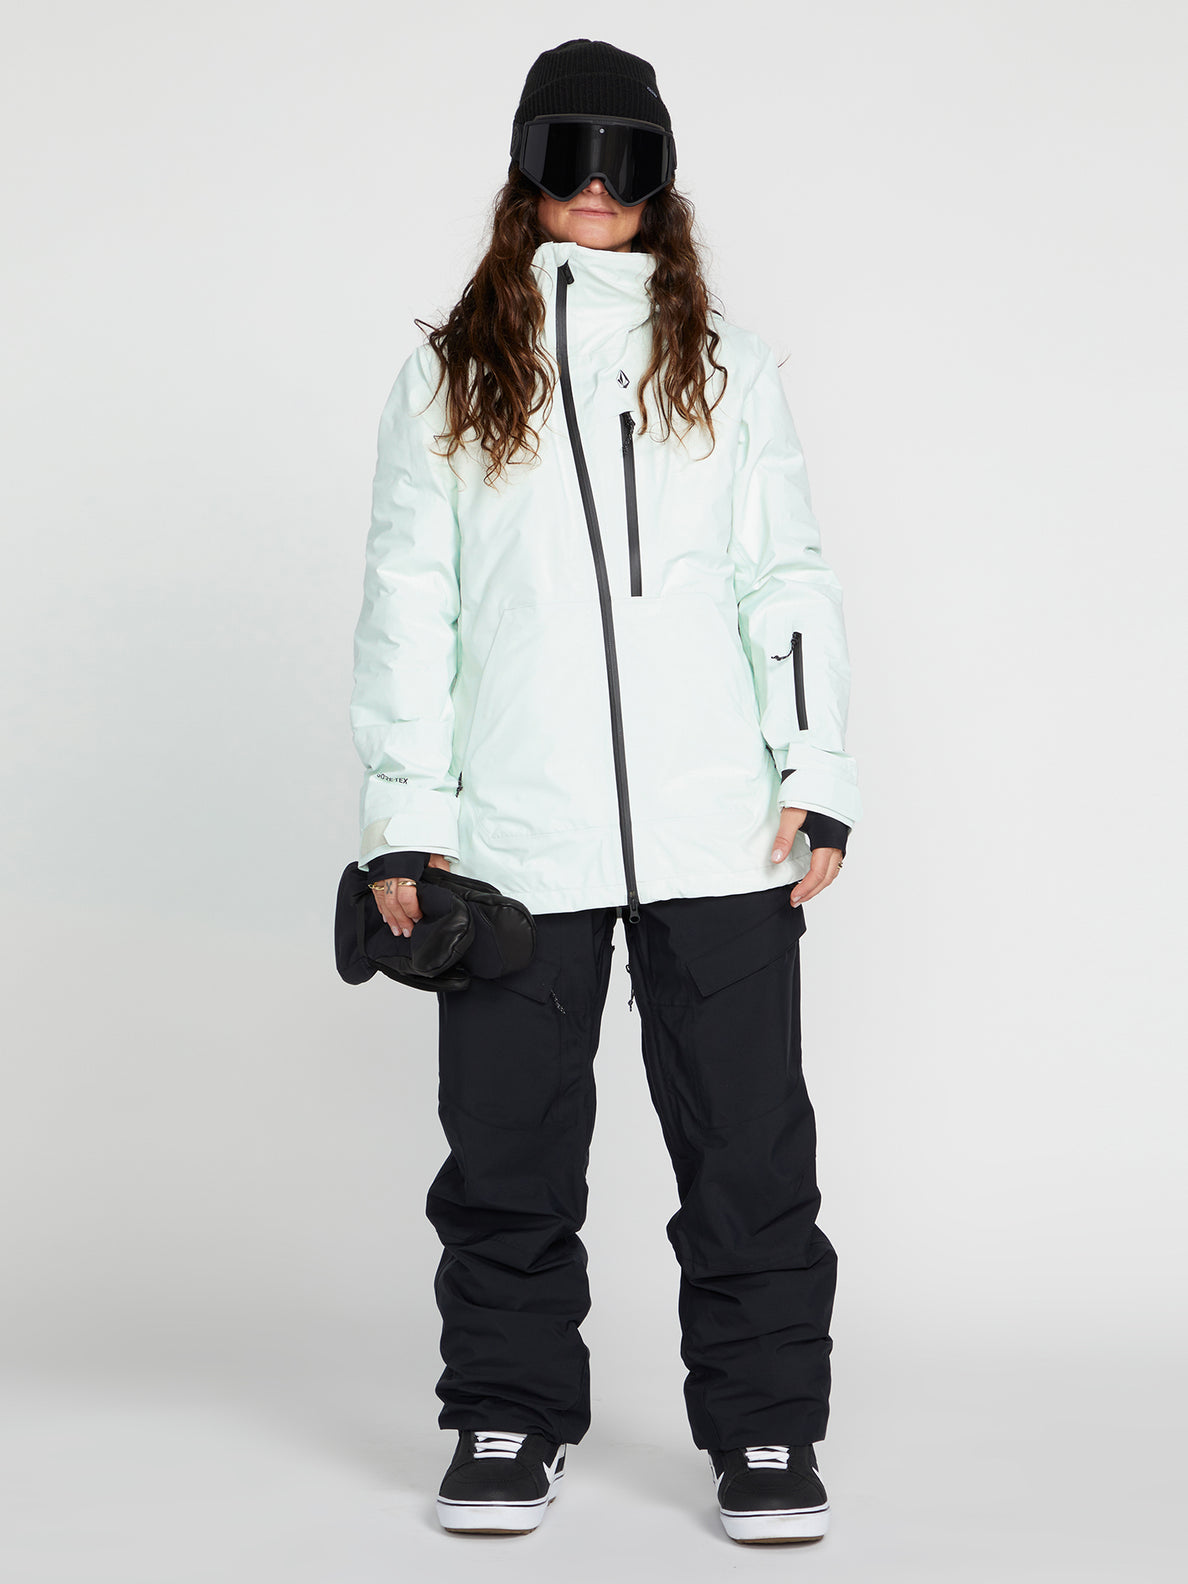 Womens Nya Tds Infrared Gore-Tex Jacket - Ice Green (H0452309_ICG) [F]